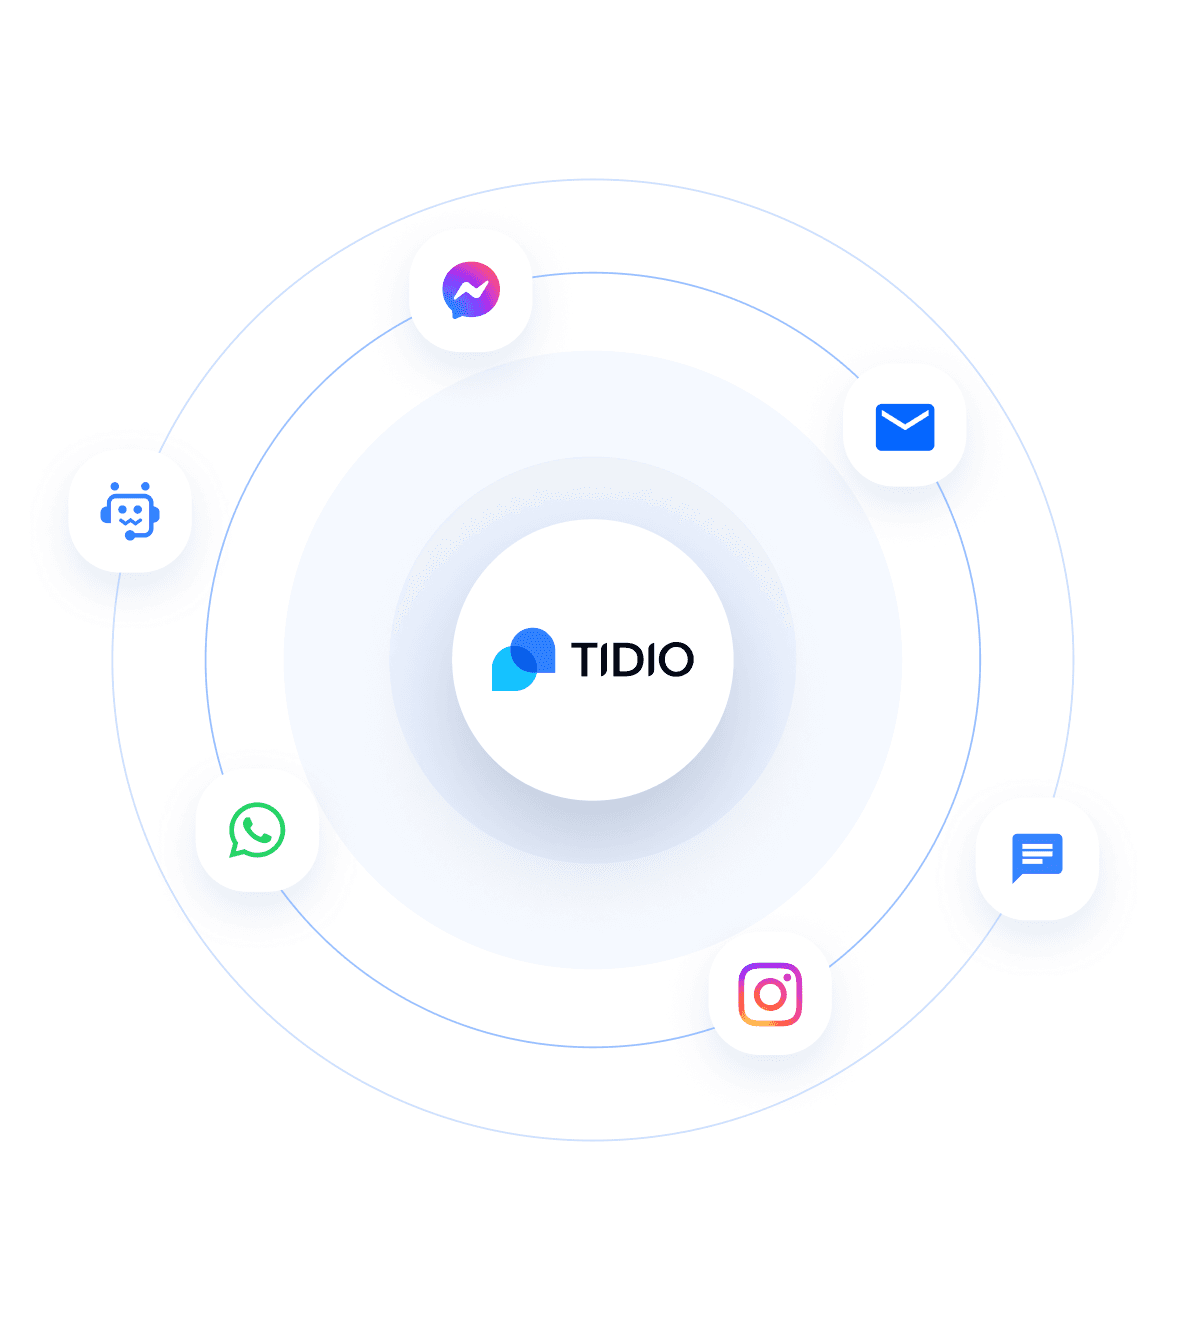 Manage all your chats with Tidio Multichannel